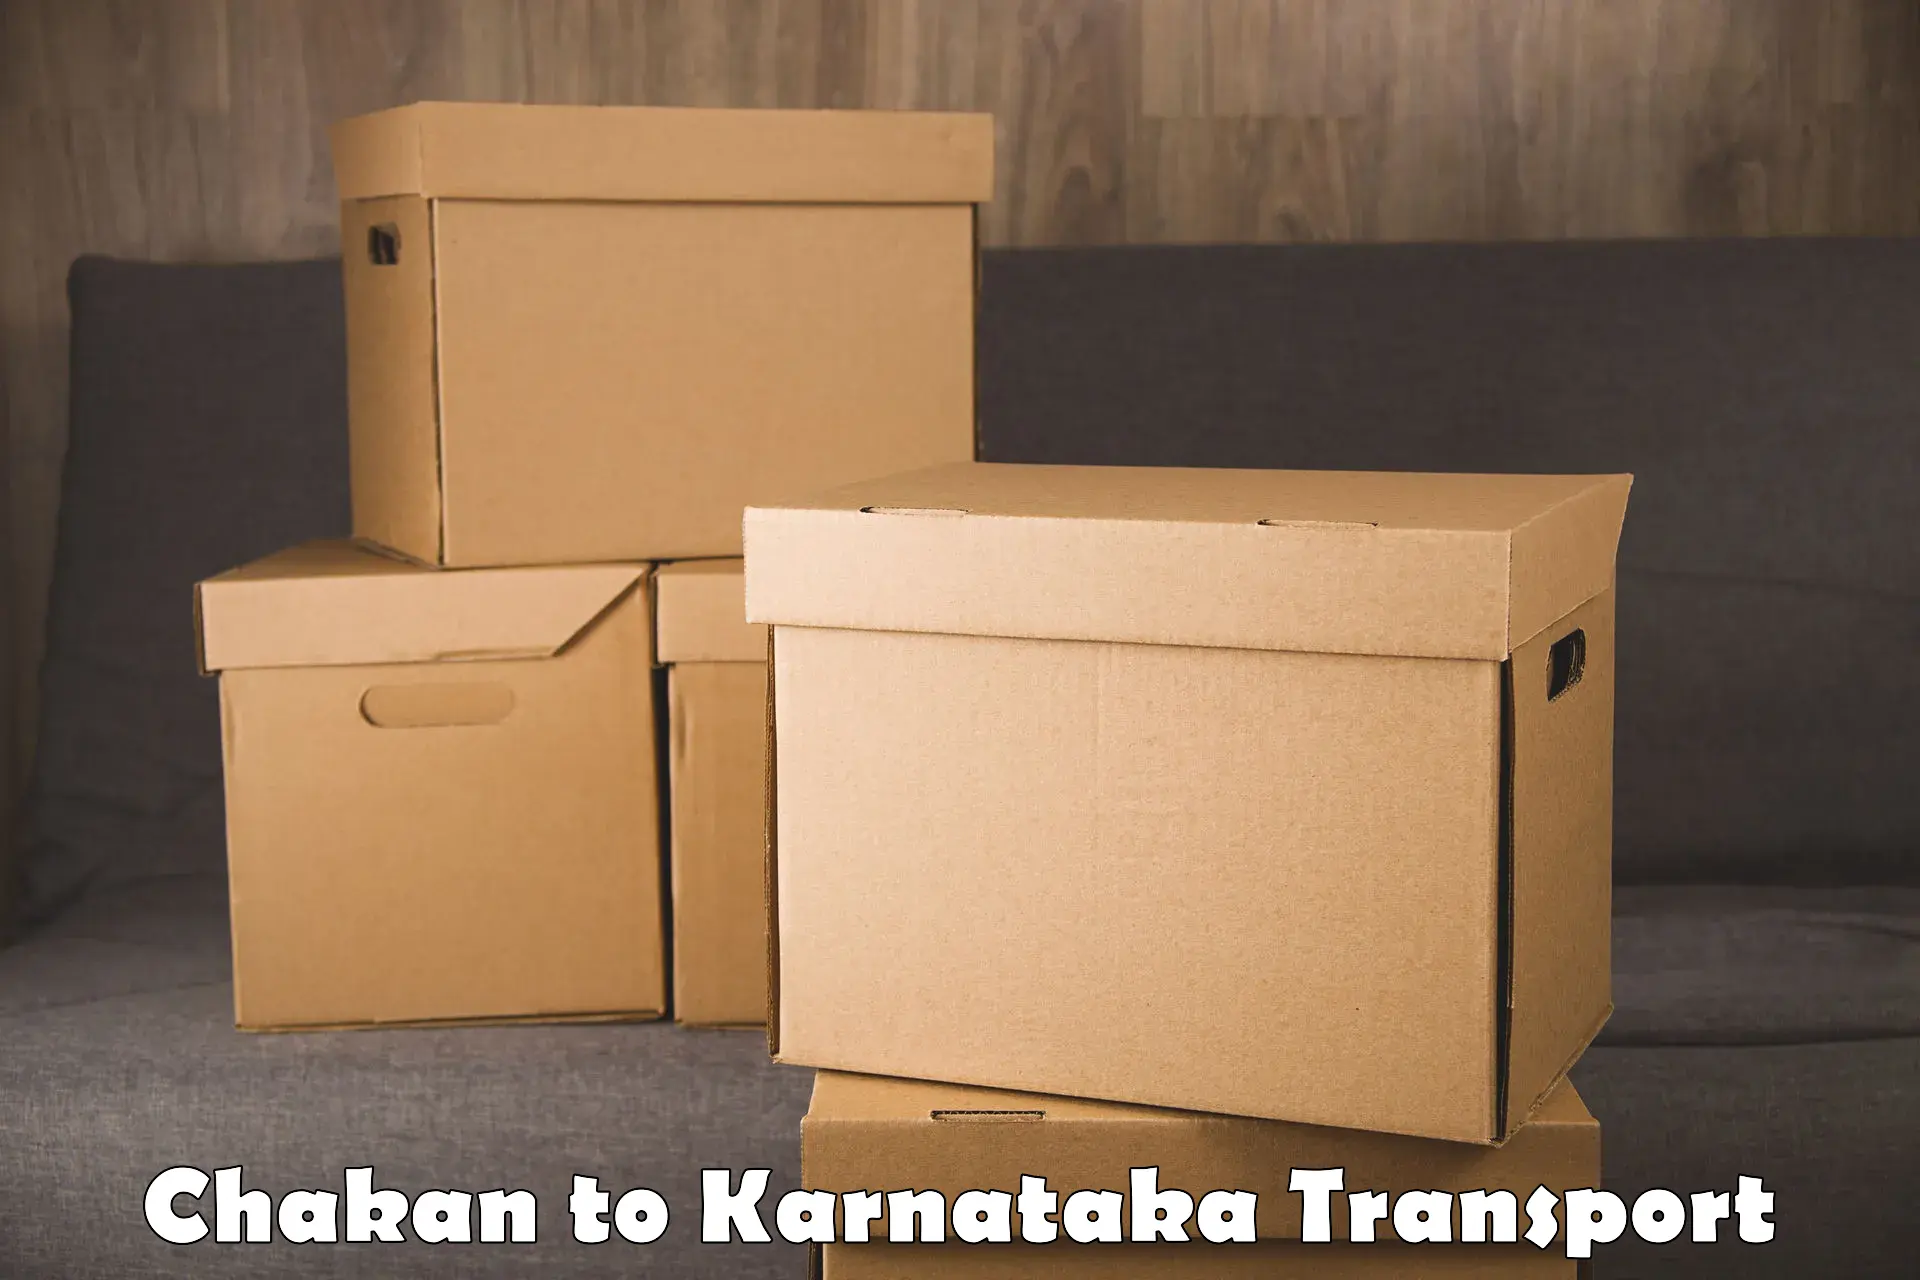 Container transport service Chakan to Bangalore